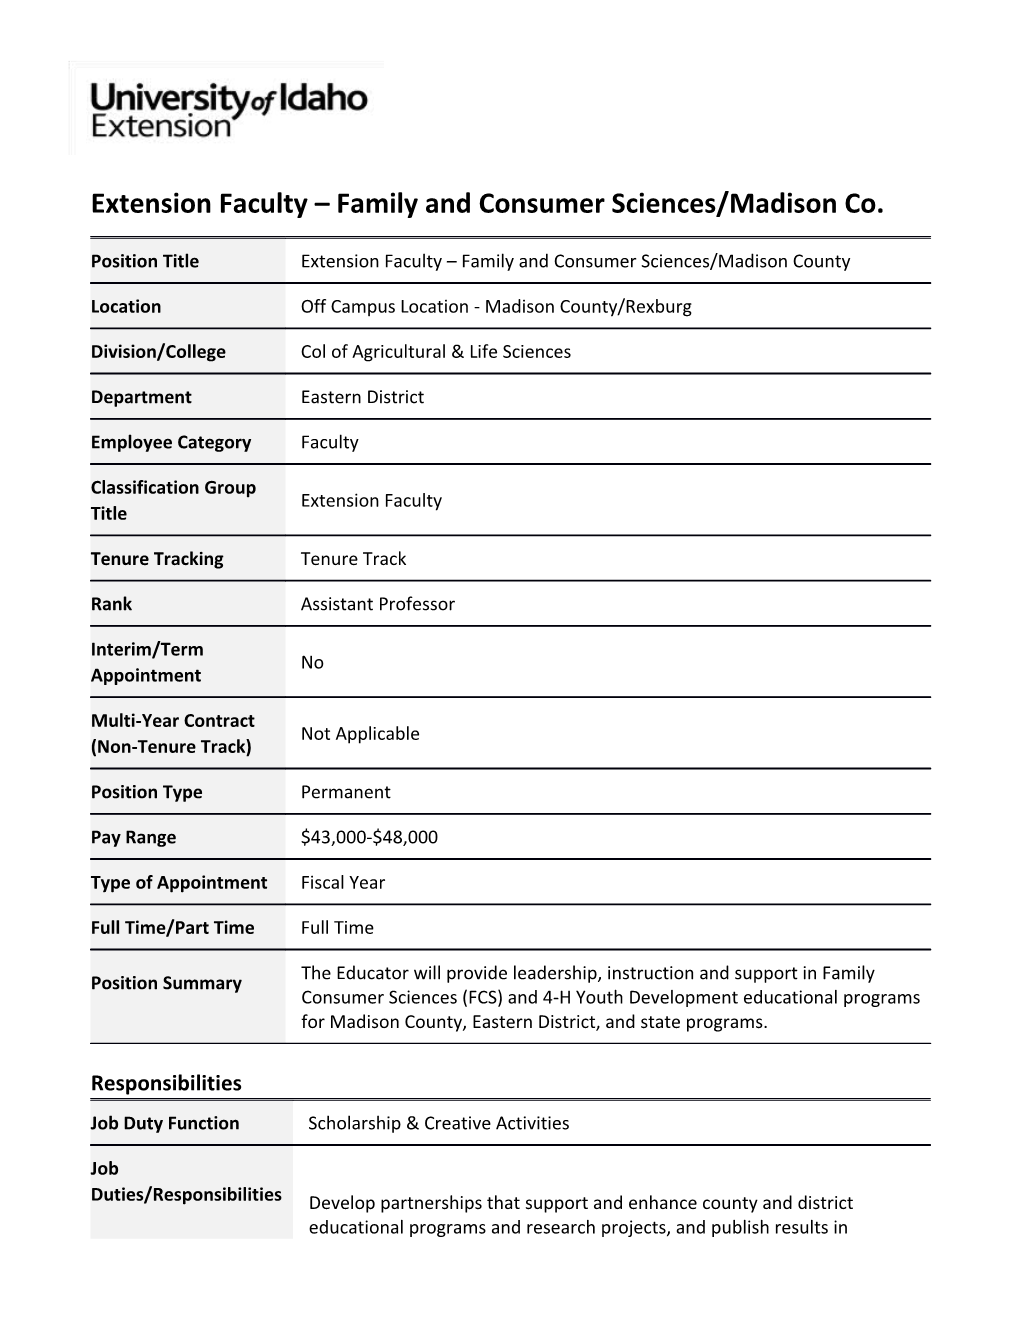 Extension Faculty Family and Consumer Sciences/Madison Co